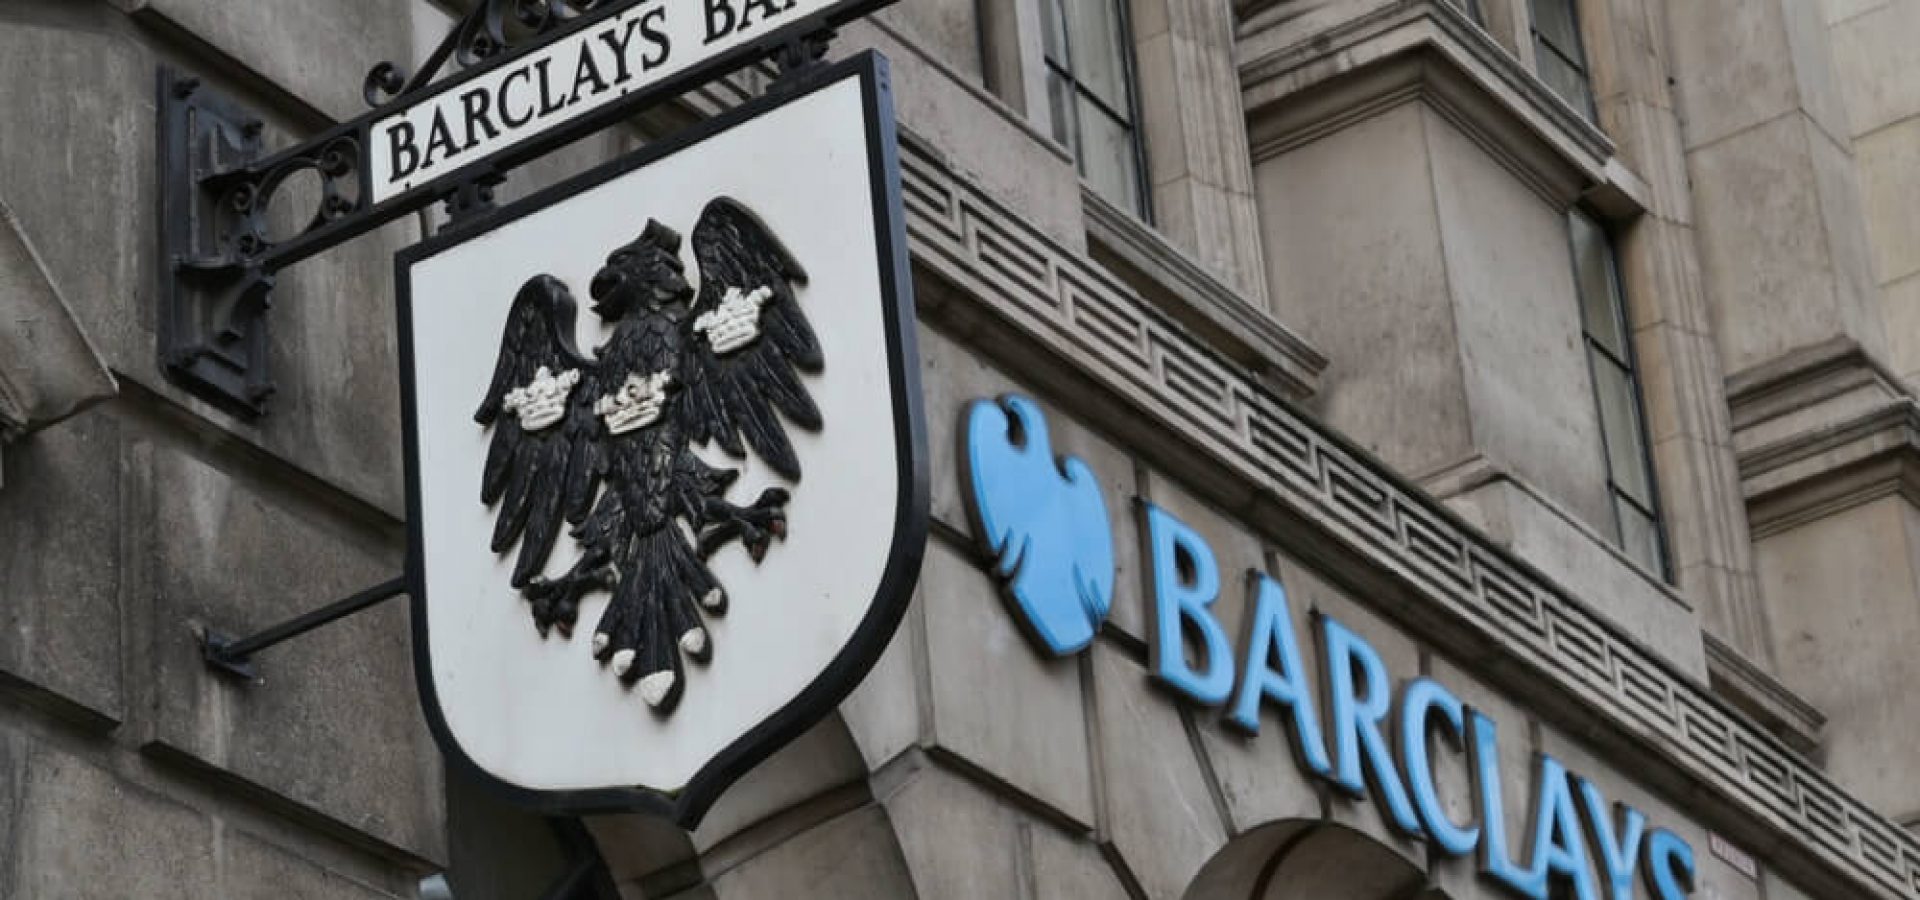 Barclays: Barclays bank old hanging street sign and modern logo next to it.